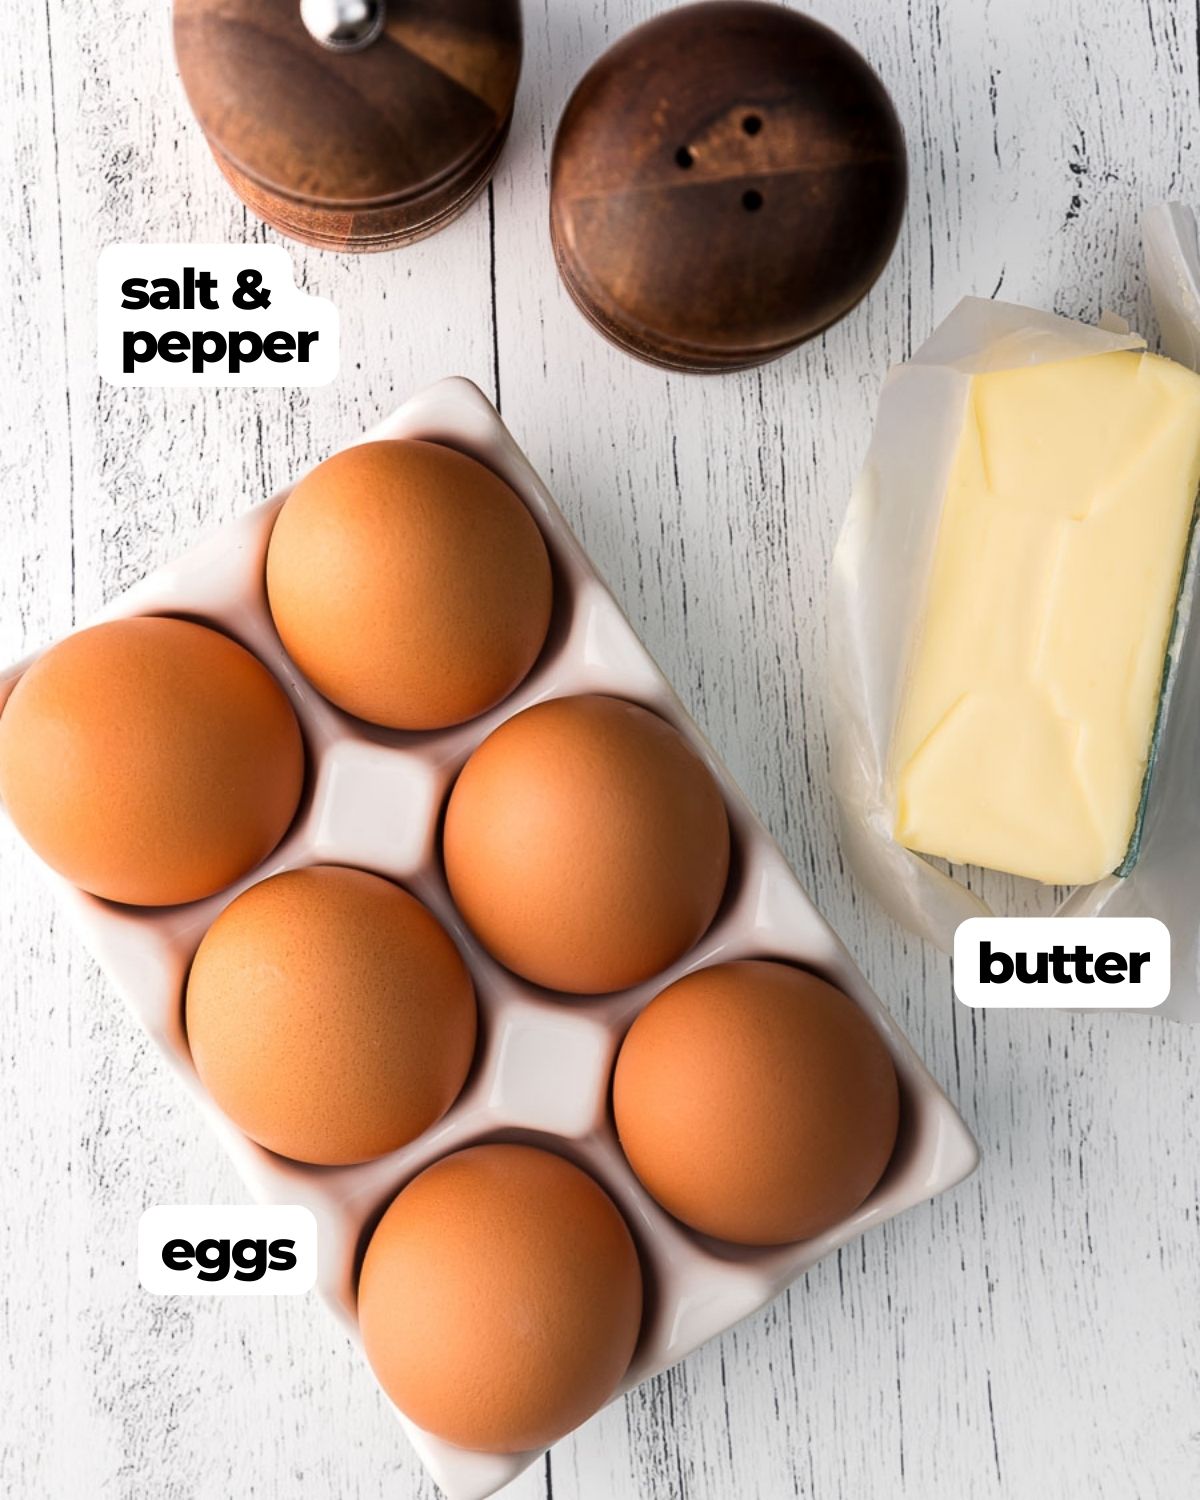 Eggs over hard labeled ingredients